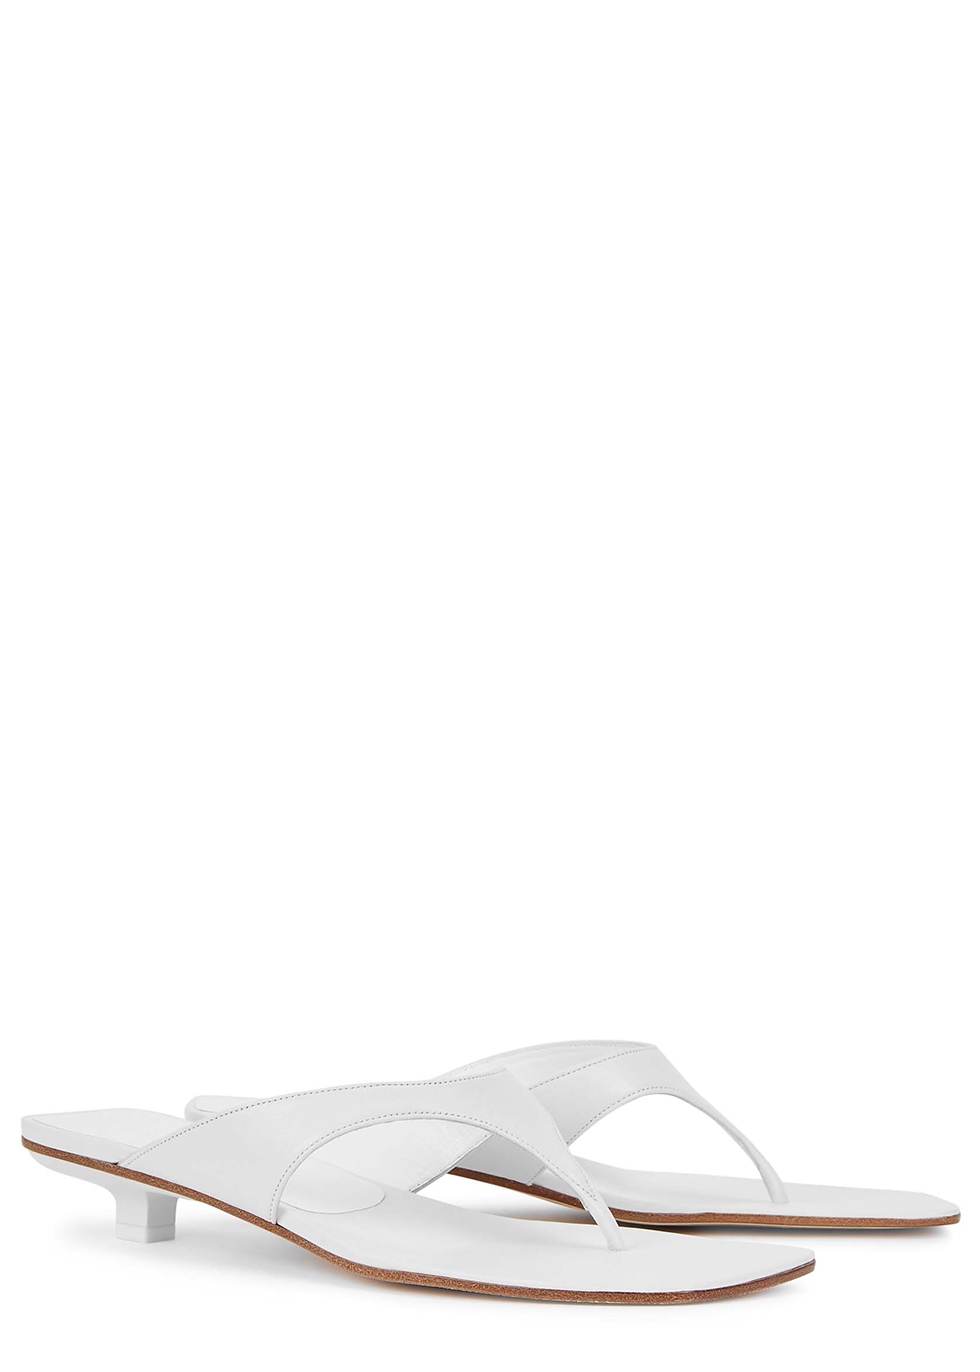 BY FAR Jack 25 white leather sandals 